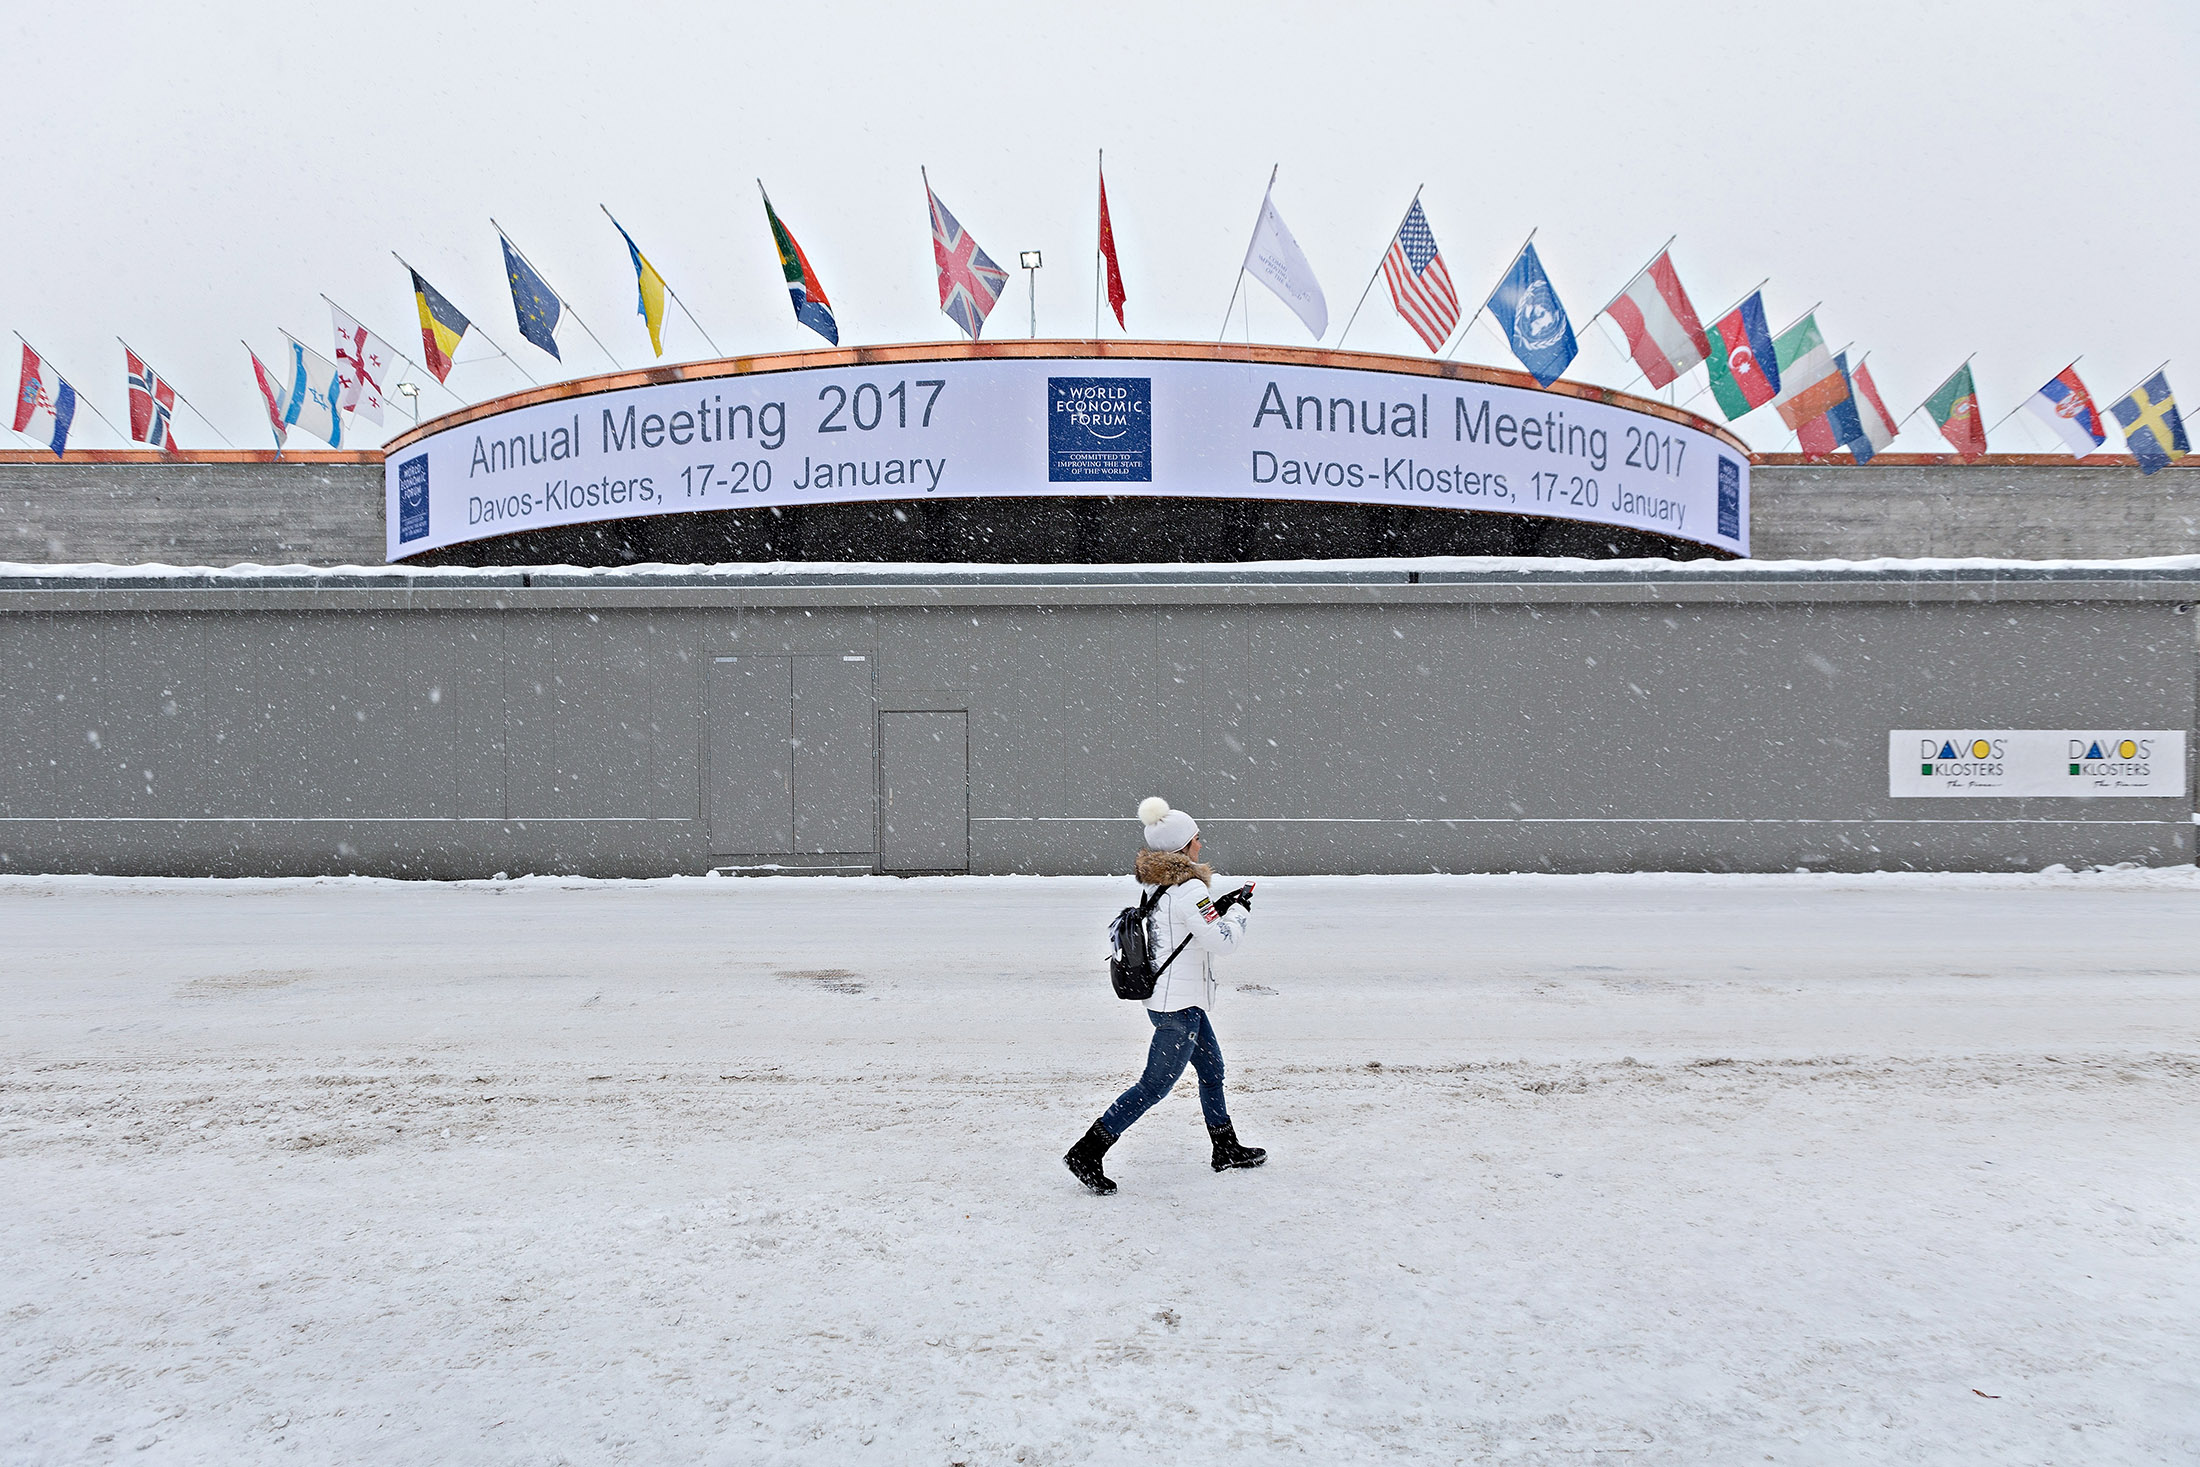 A woman walks past the entrance to the Congress Center, venue for the World Economic Forum (WEF), in Davos on Jan. 13, 2017.
